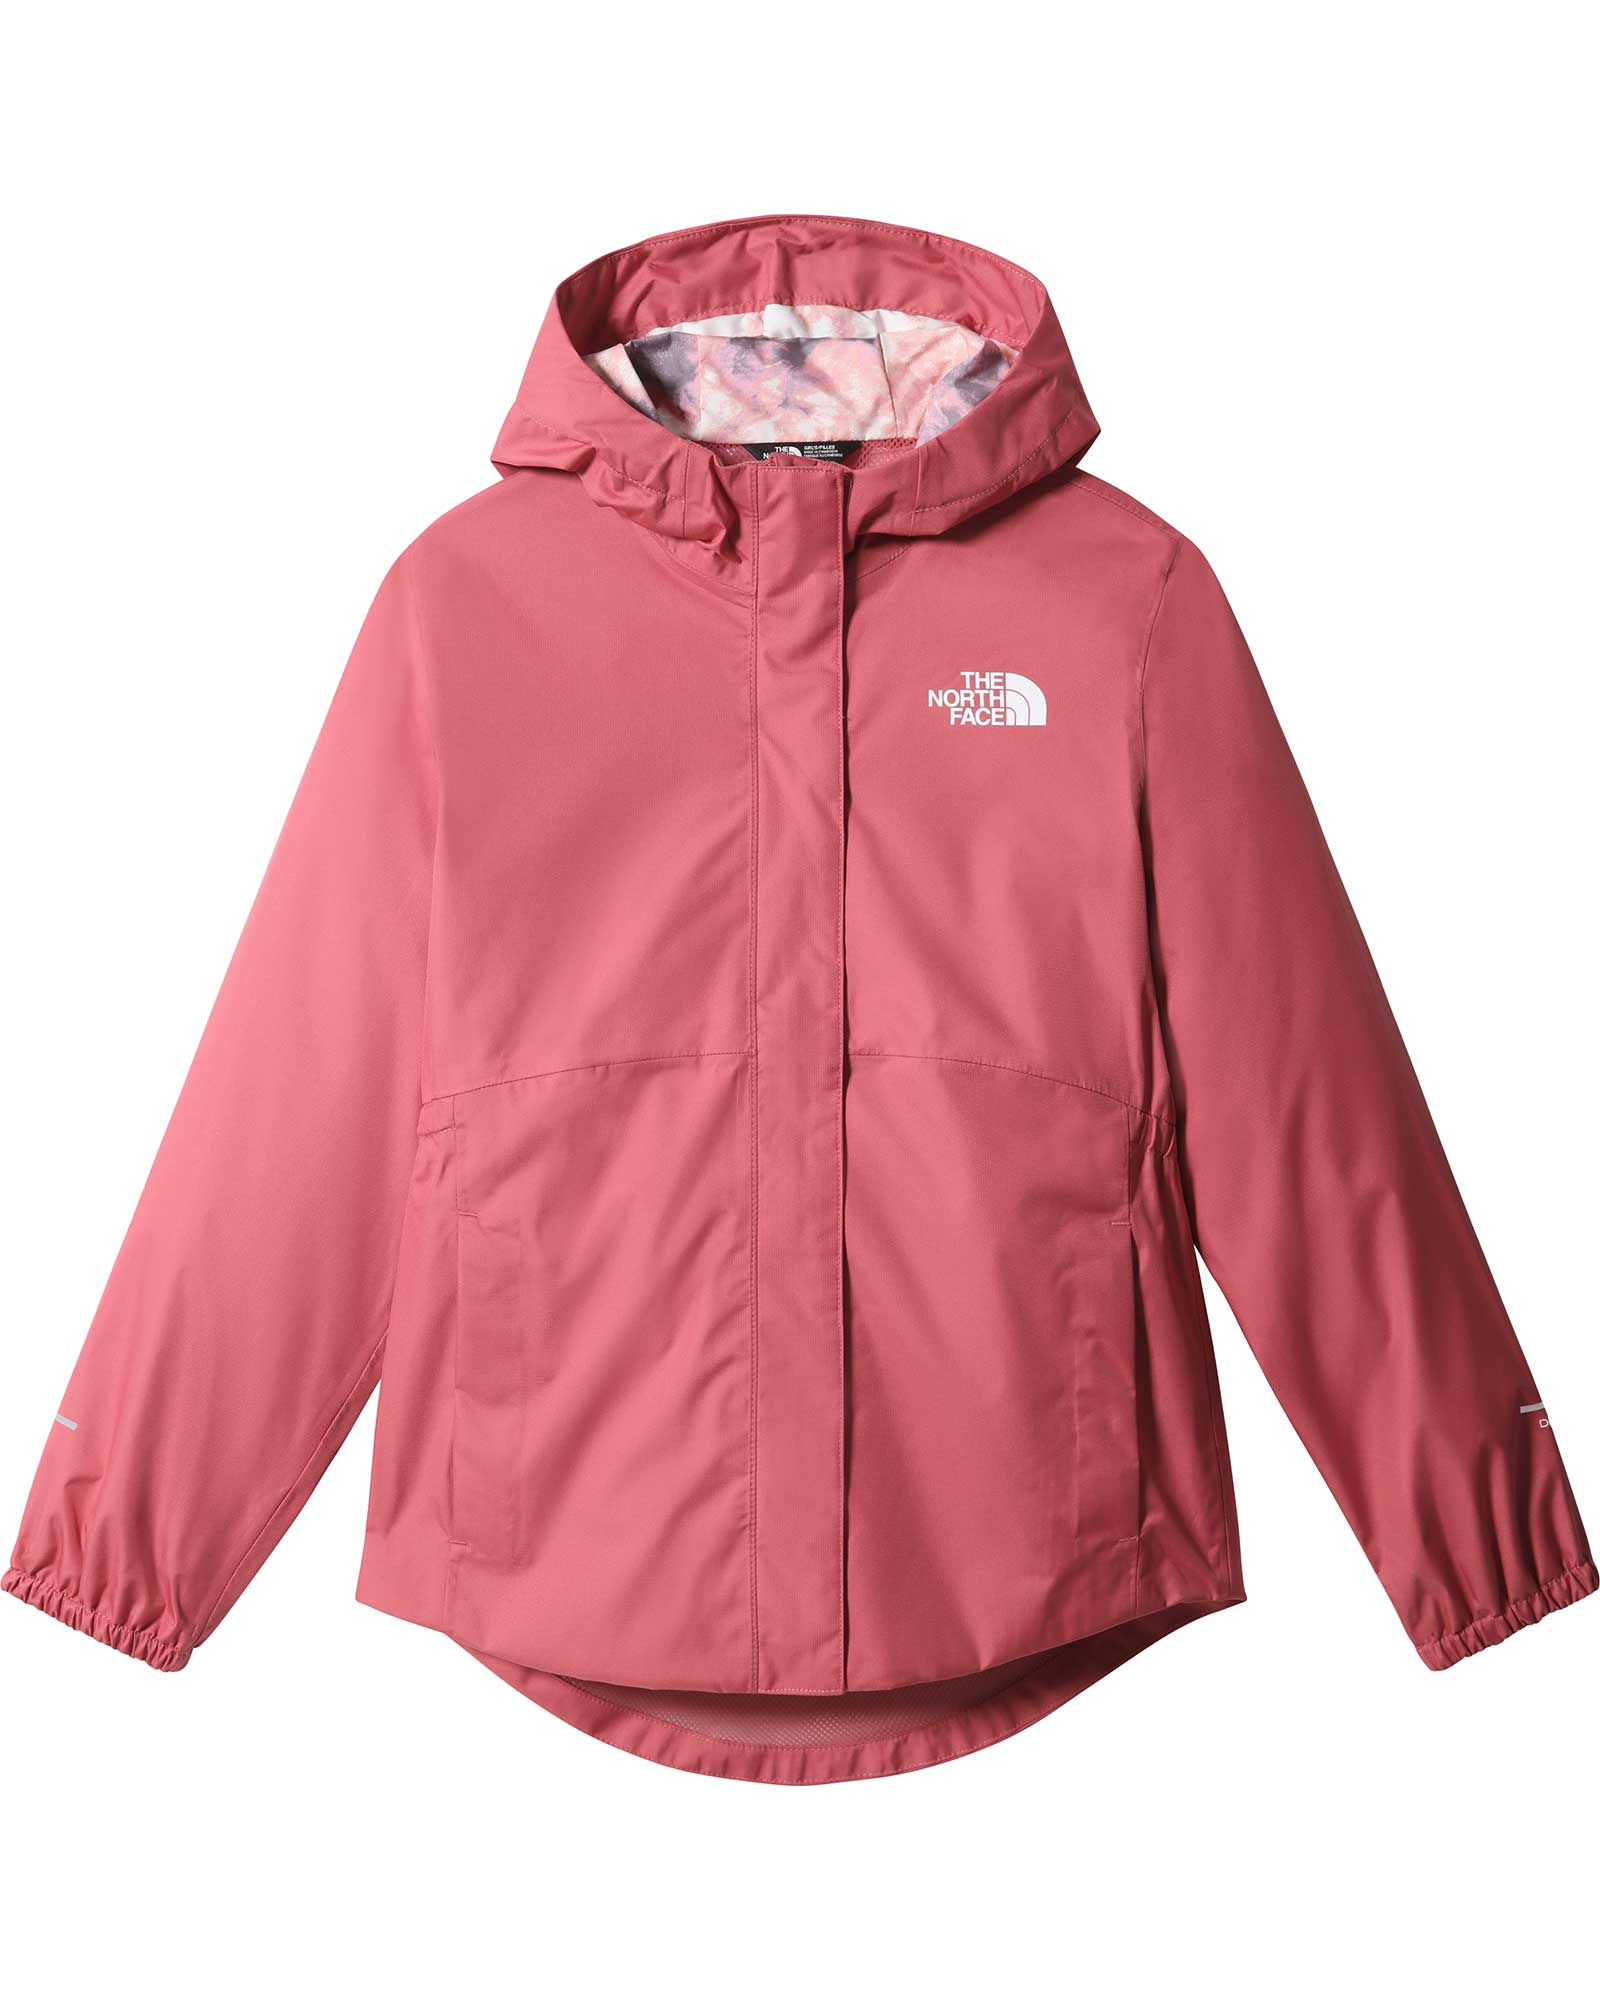 Product image of The North Face Antora Girls' Rain Jacket